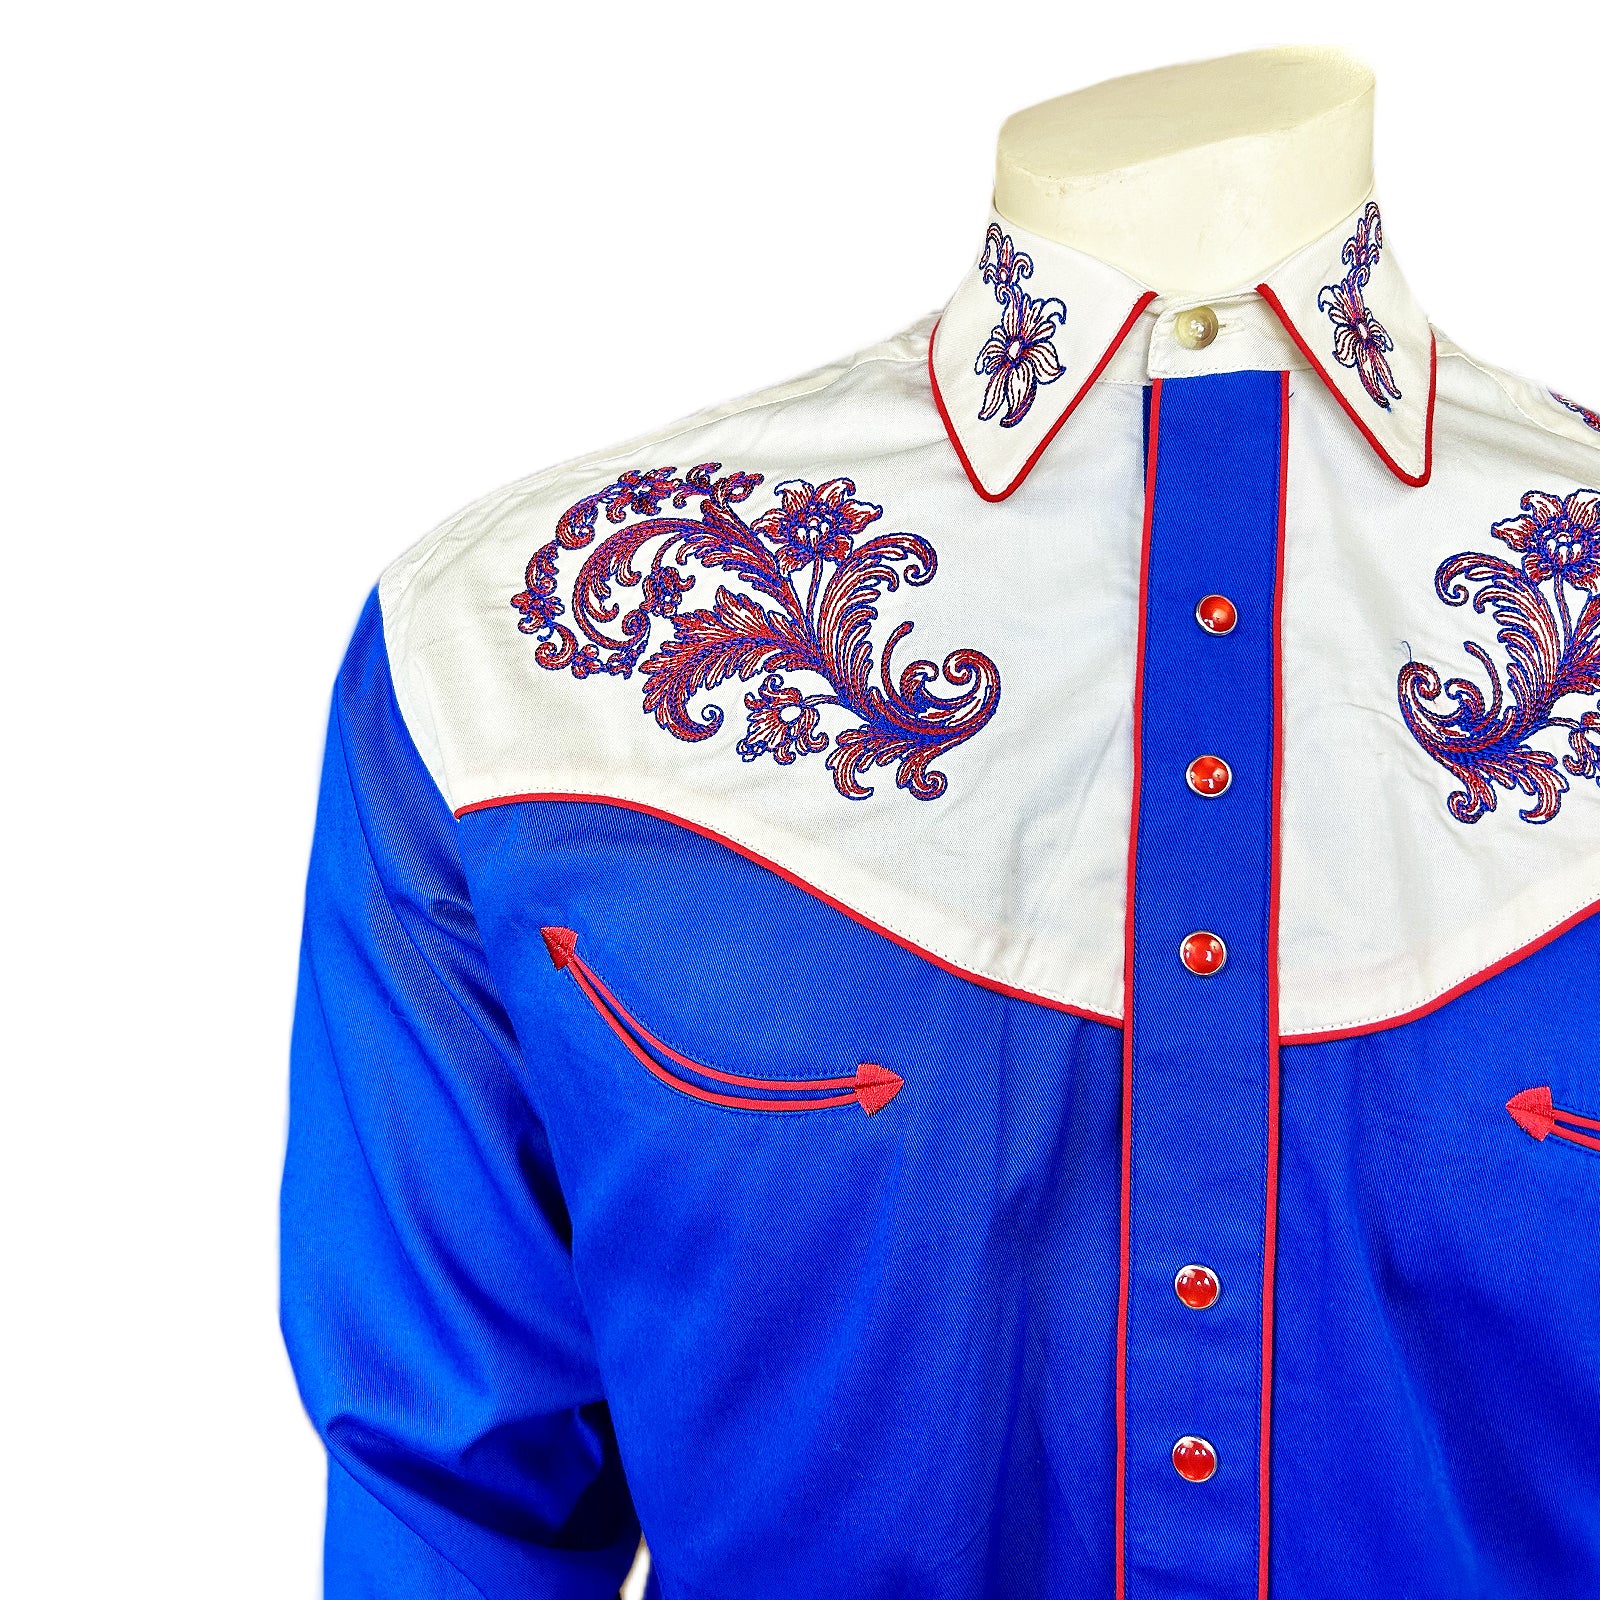 Men’s Vintage 2-Tone Royal Blue & White Western Shirt with Floral Embroidery